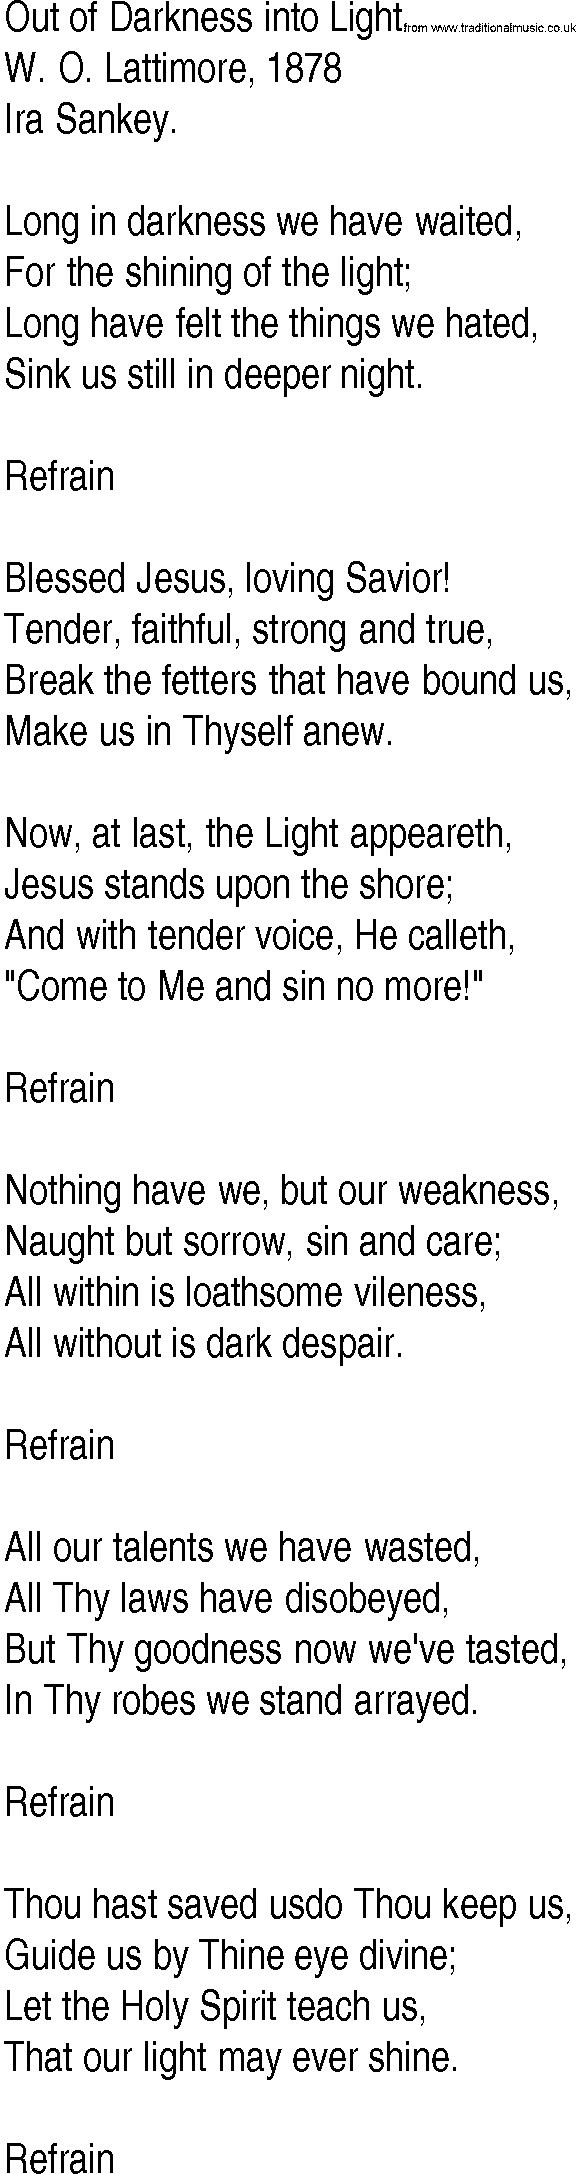 Hymn and Gospel Song: Out of Darkness into Light by W O Lattimore lyrics